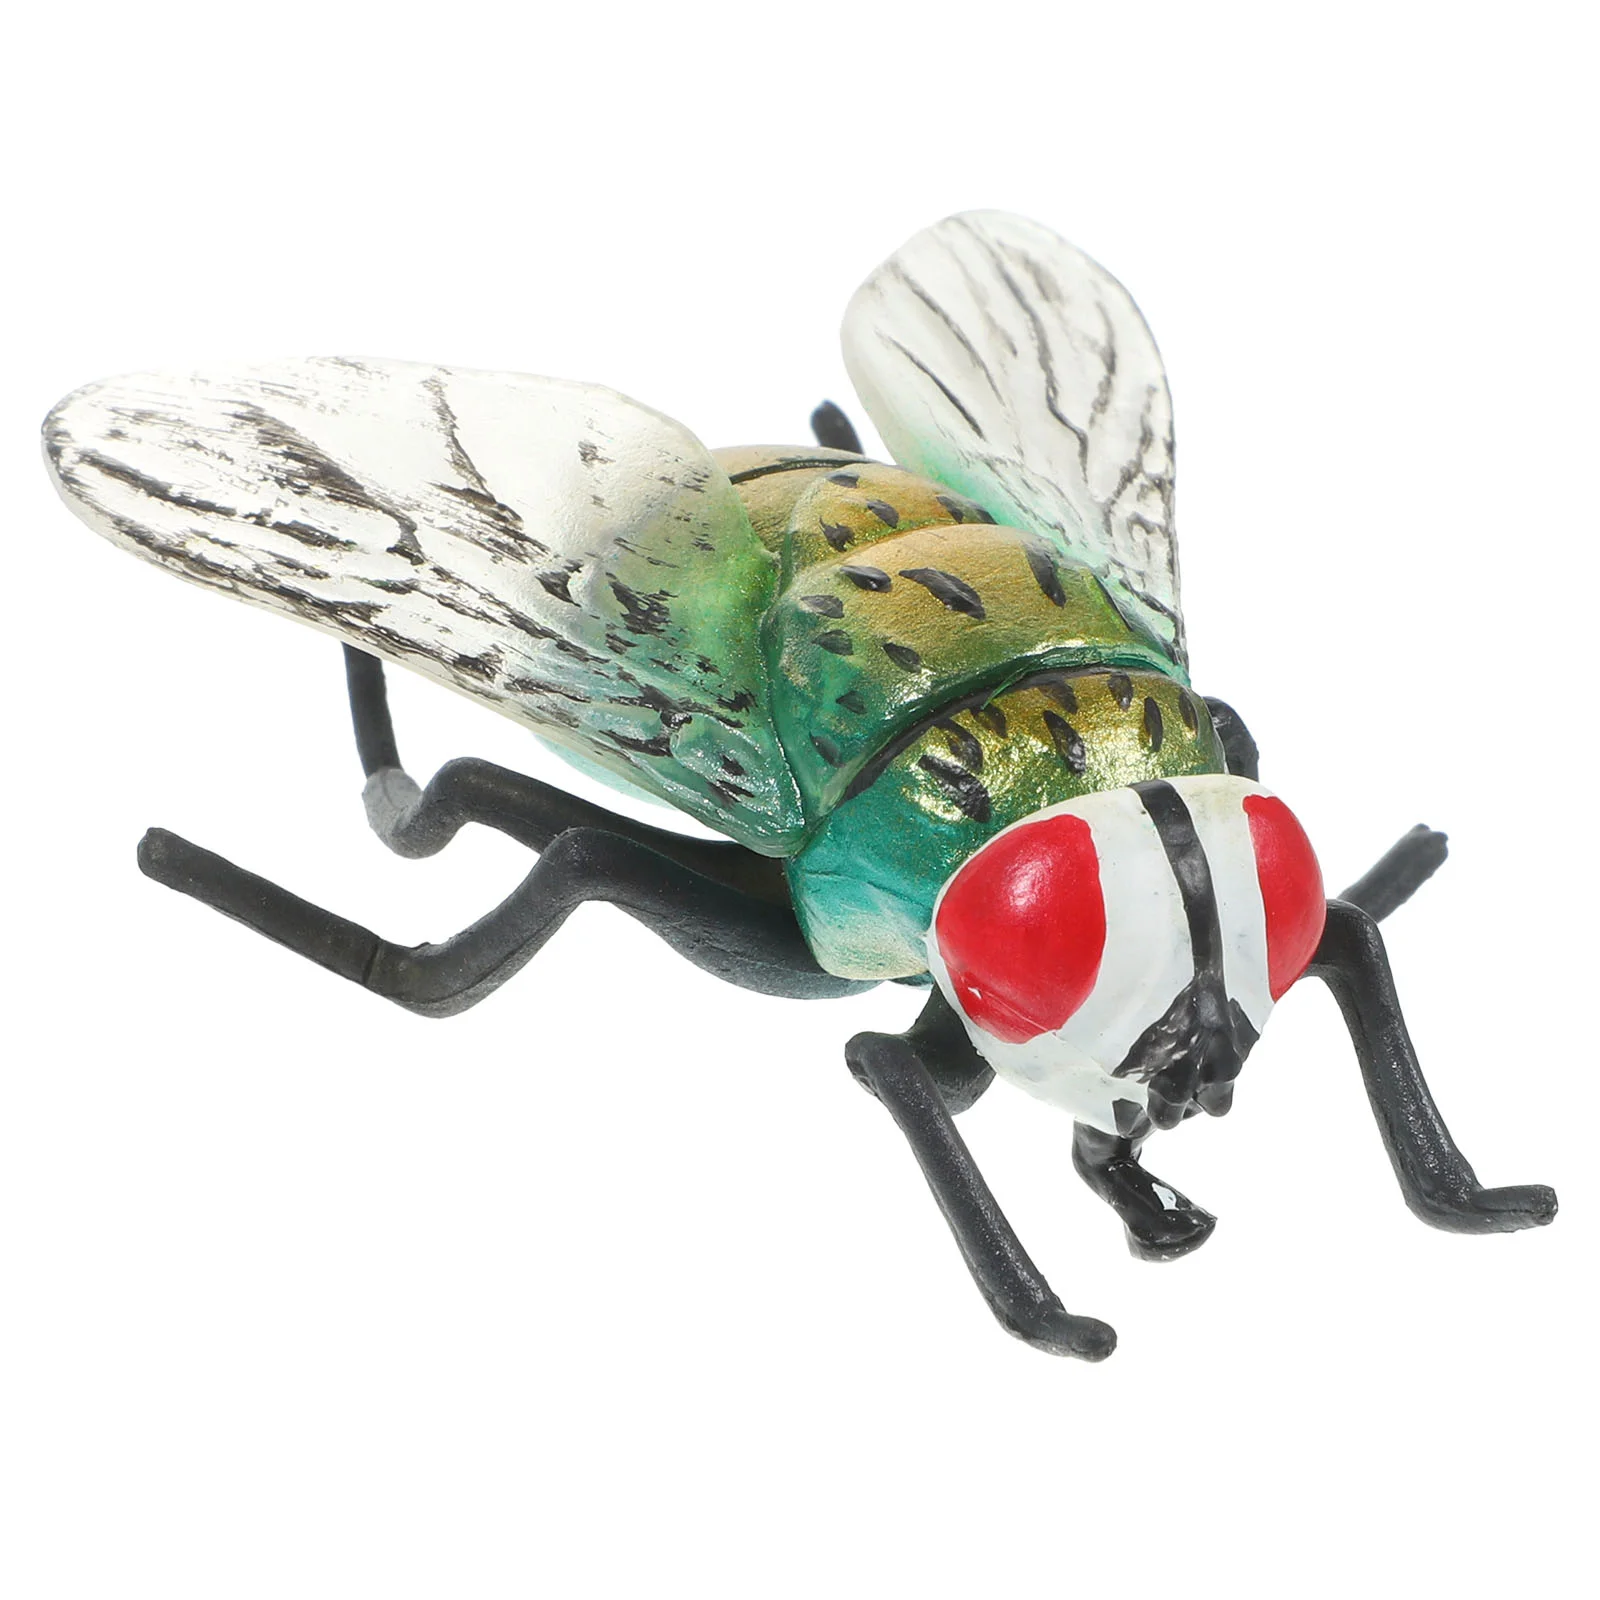 

Toy's Kids Puffer Fish Fake Insects Blowfly Desktop Realistic Plastic Artificial Child